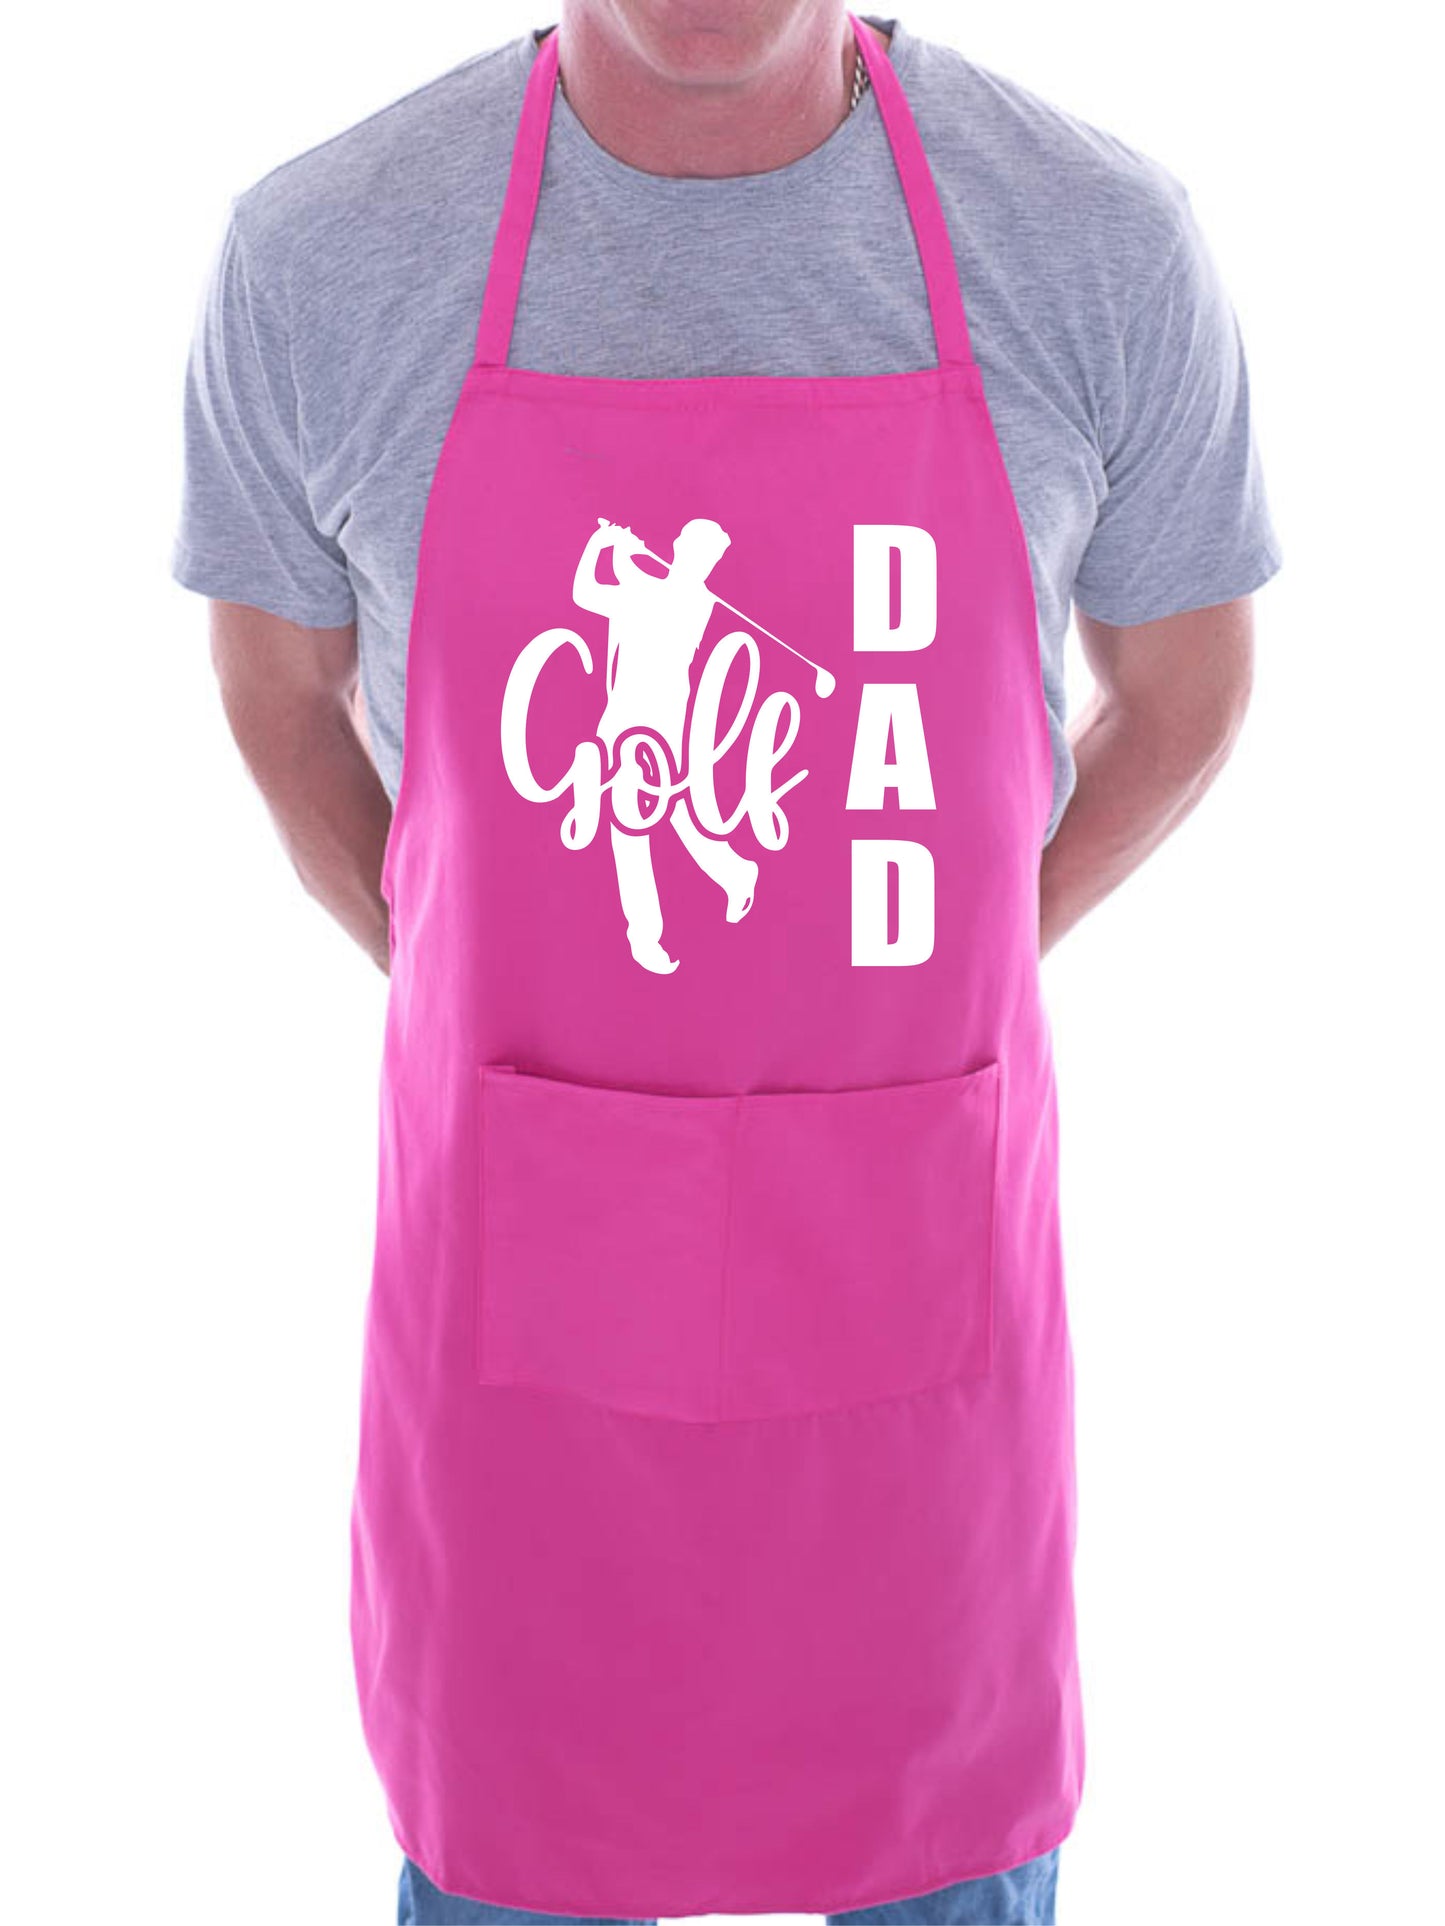 Golf Dad Golfer Apron Funny Birthday Gift Father's Day Cooking Baking BBQ